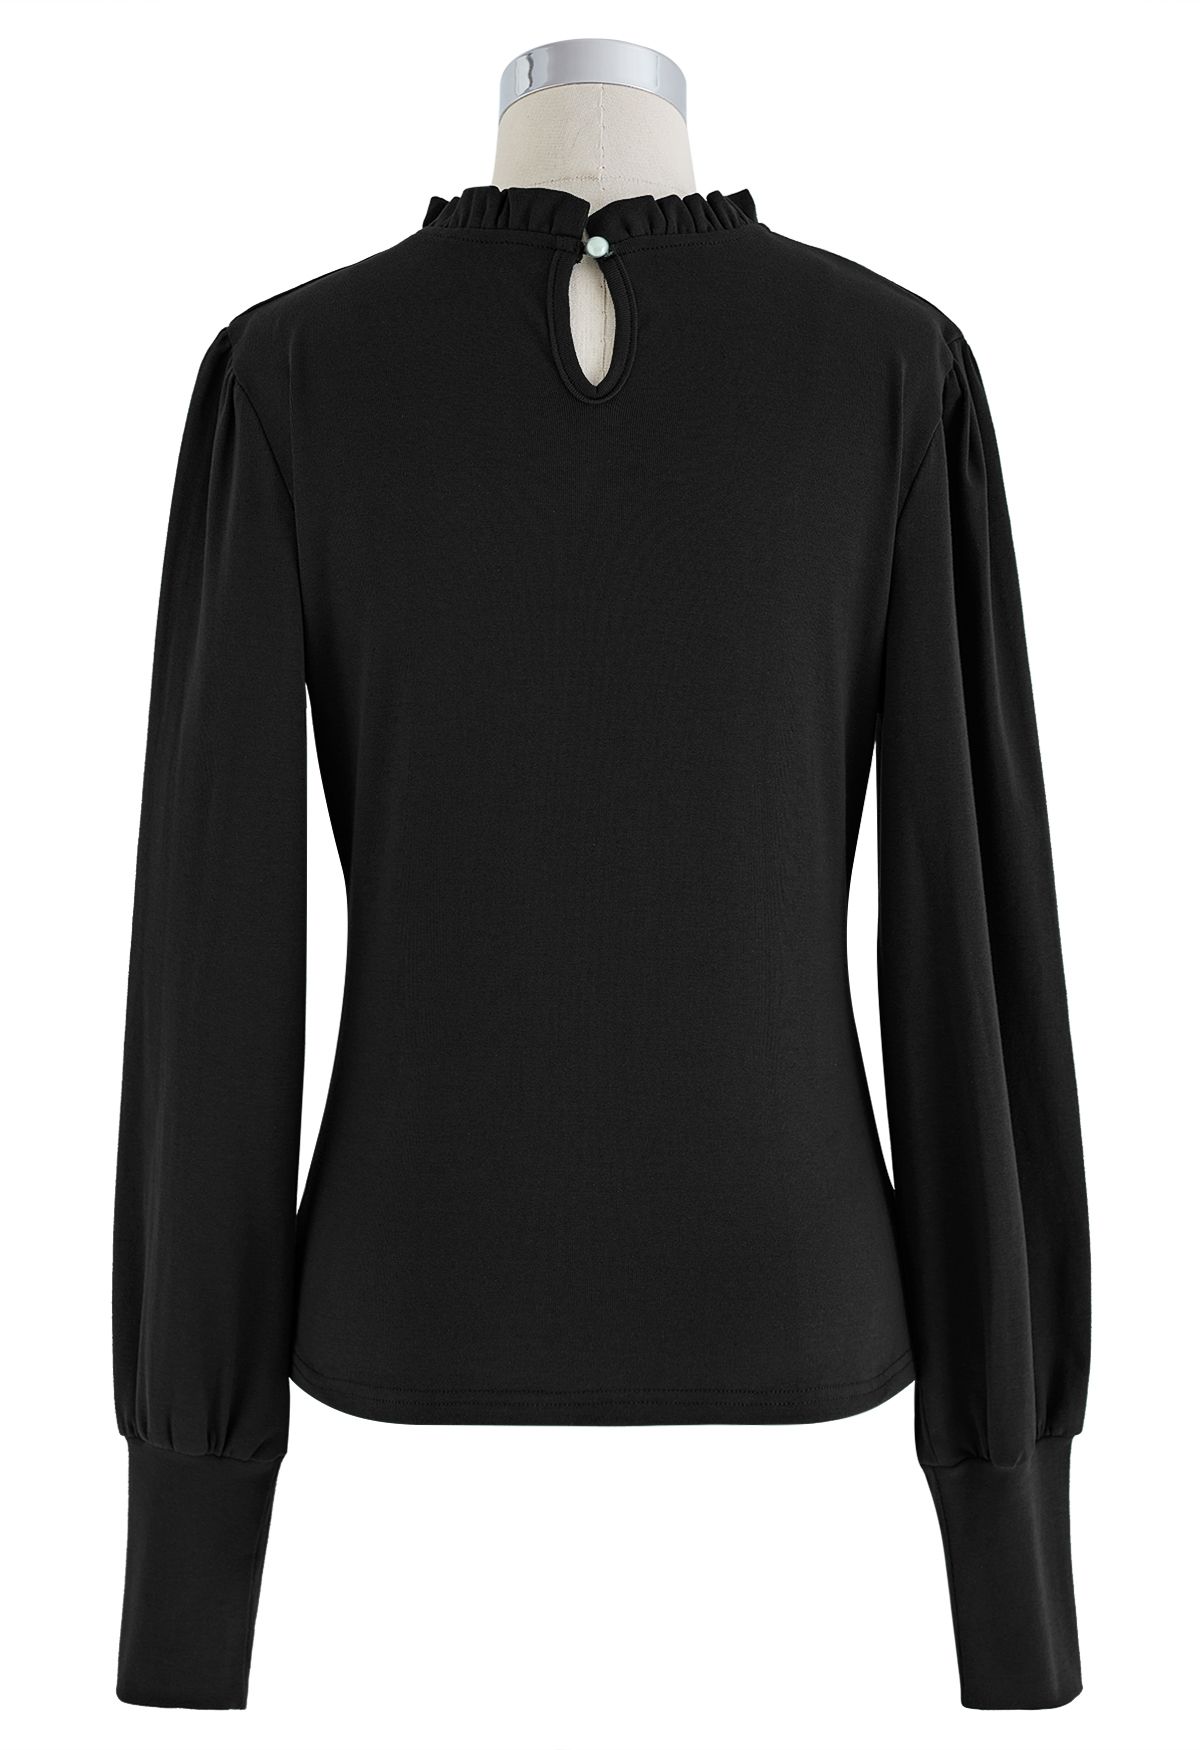 Ruched Front Ruffle Neck Fitted Top in Black - Retro, Indie and Unique ...